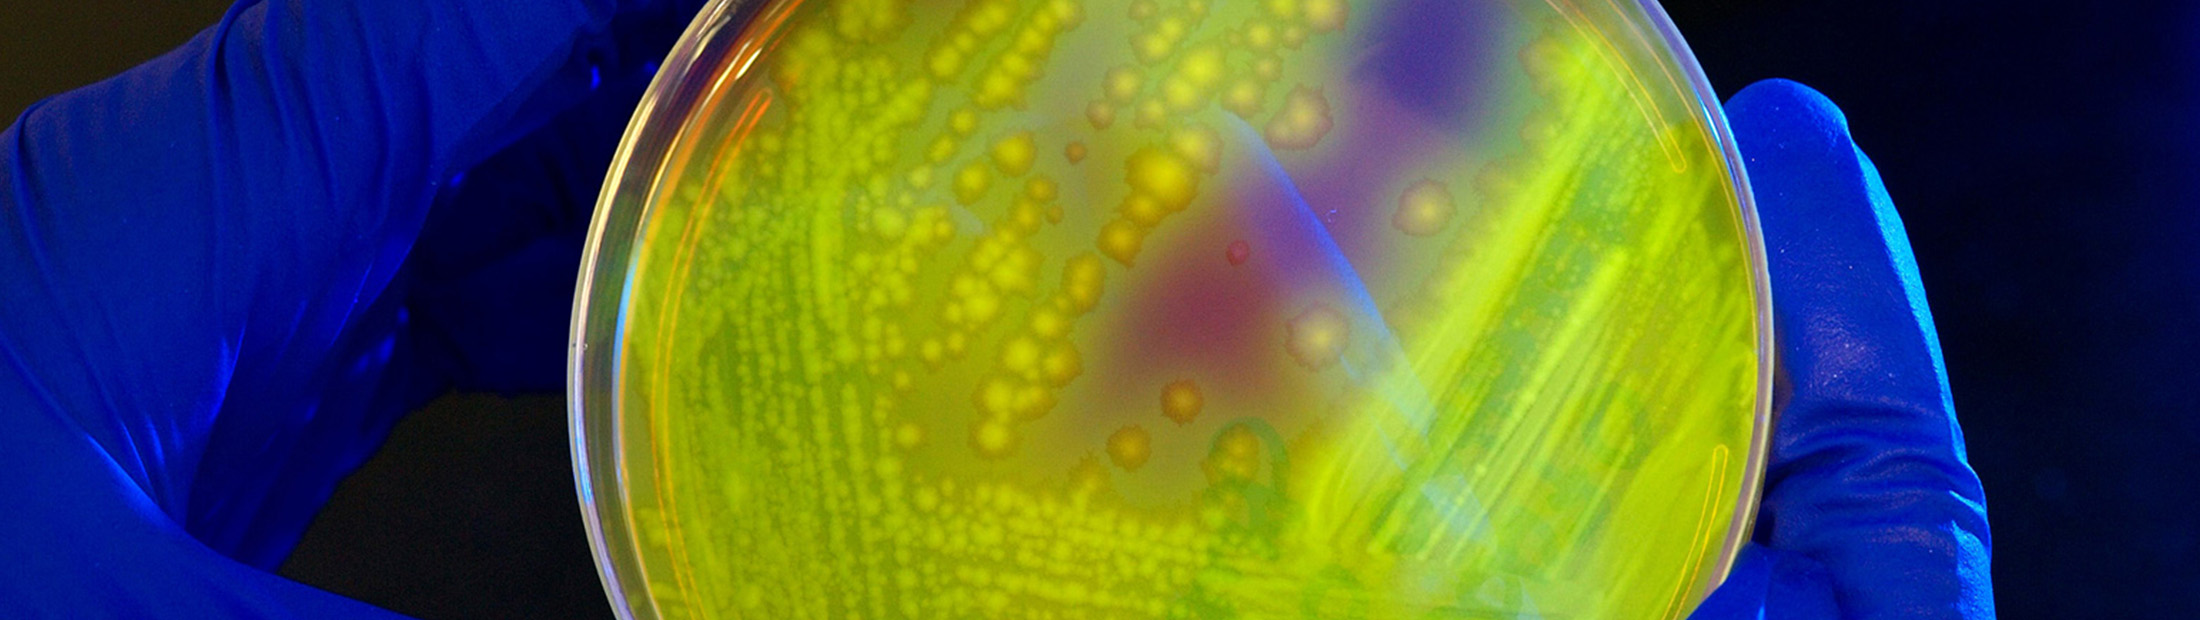 Close up of petri dish containing bacteria held by researcher